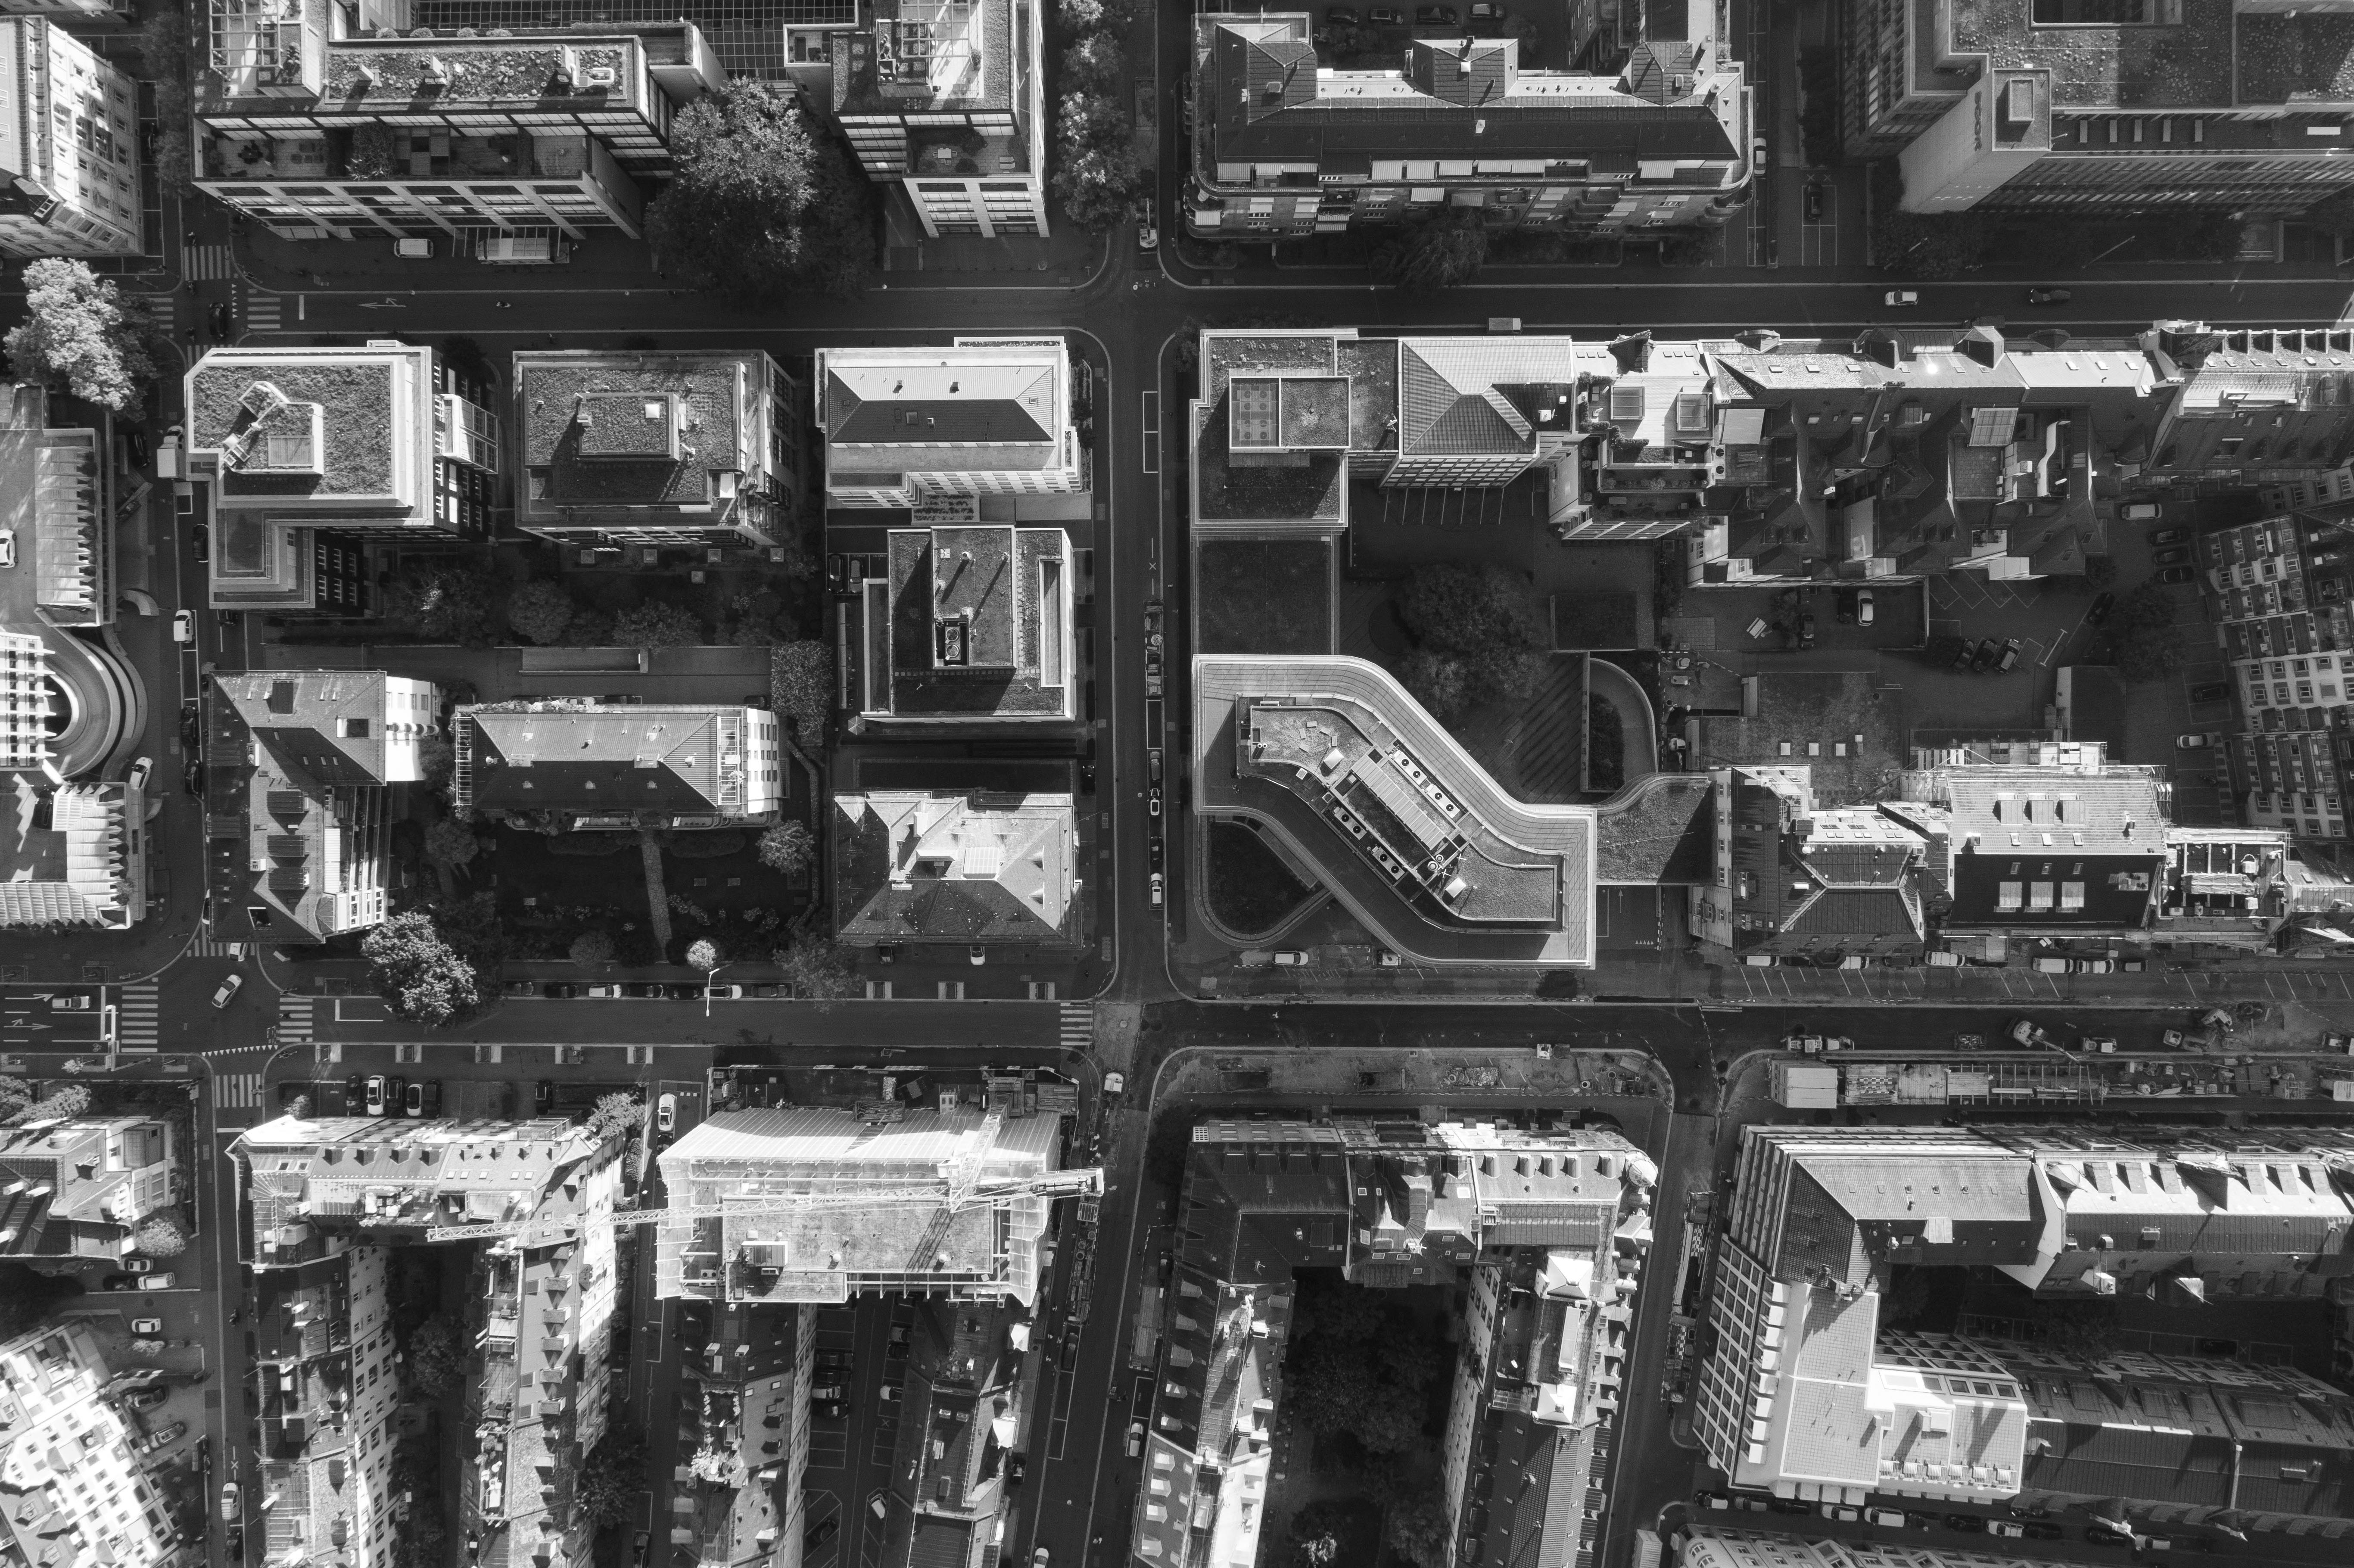 A black and white image of buildings in Zurich from a bird's eye view